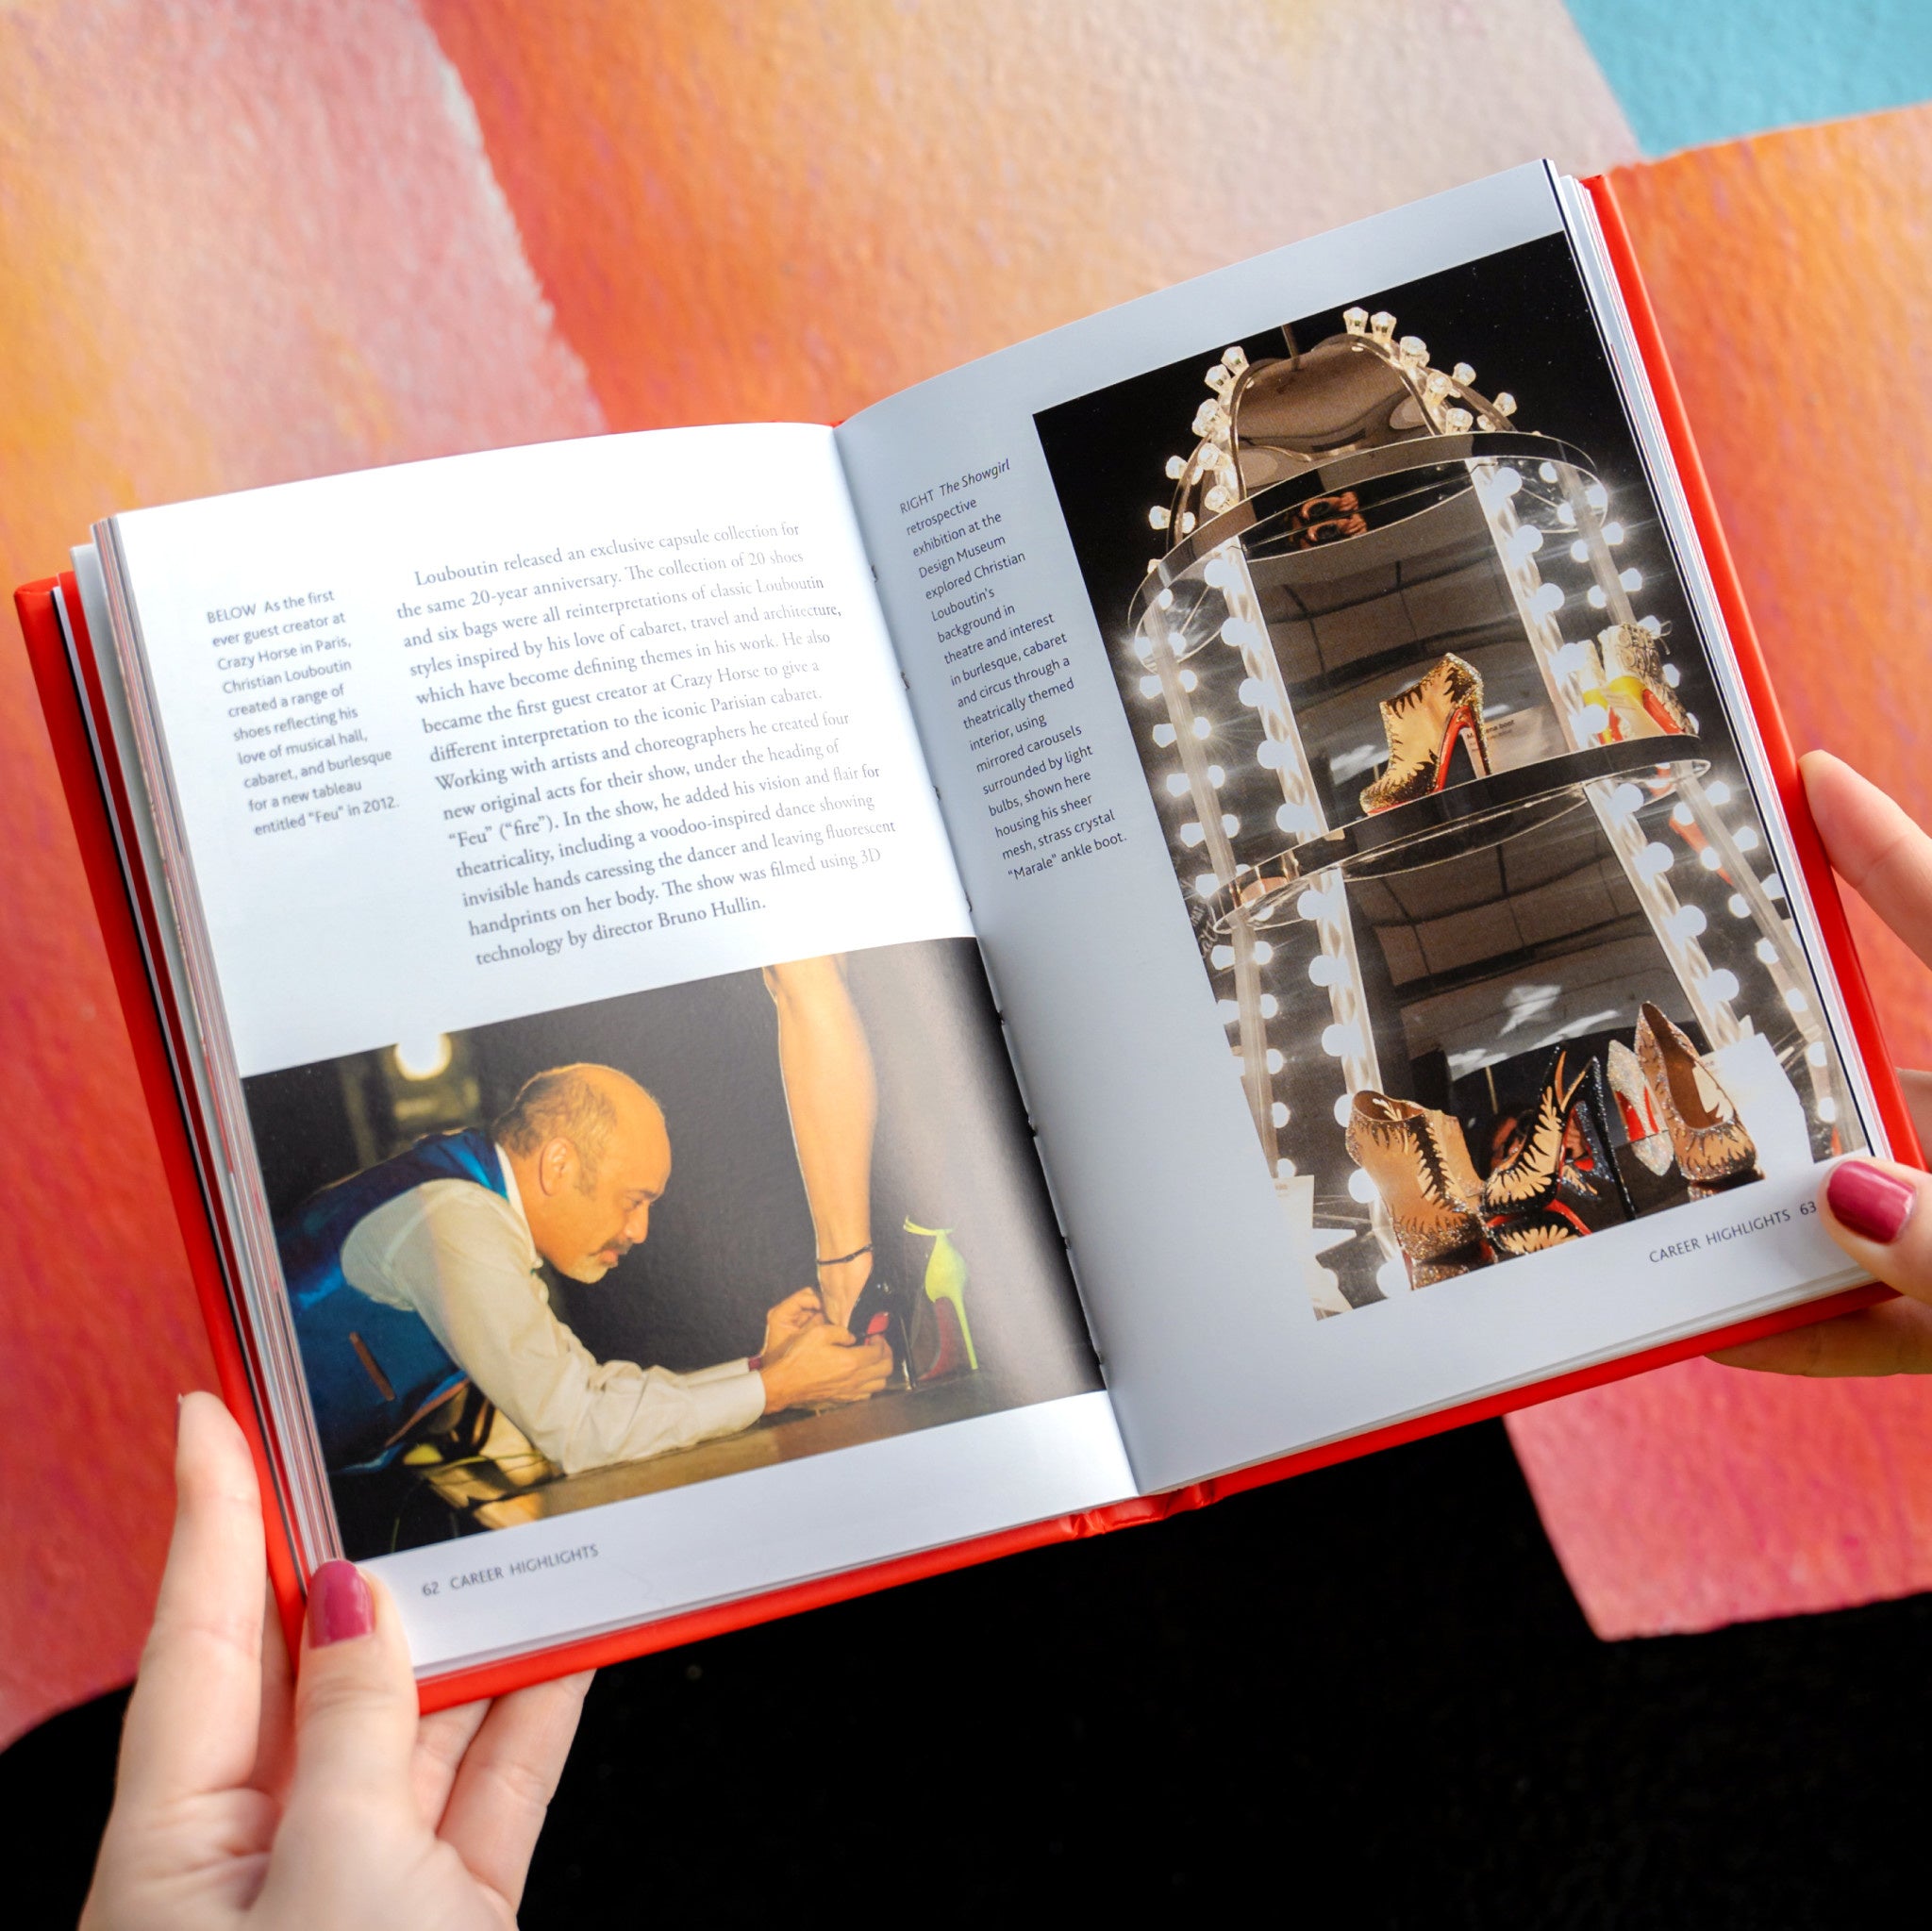 Little Book of Christian Louboutin: The Story of the Iconic Shoe Designer -  The Wynwood Walls Shop